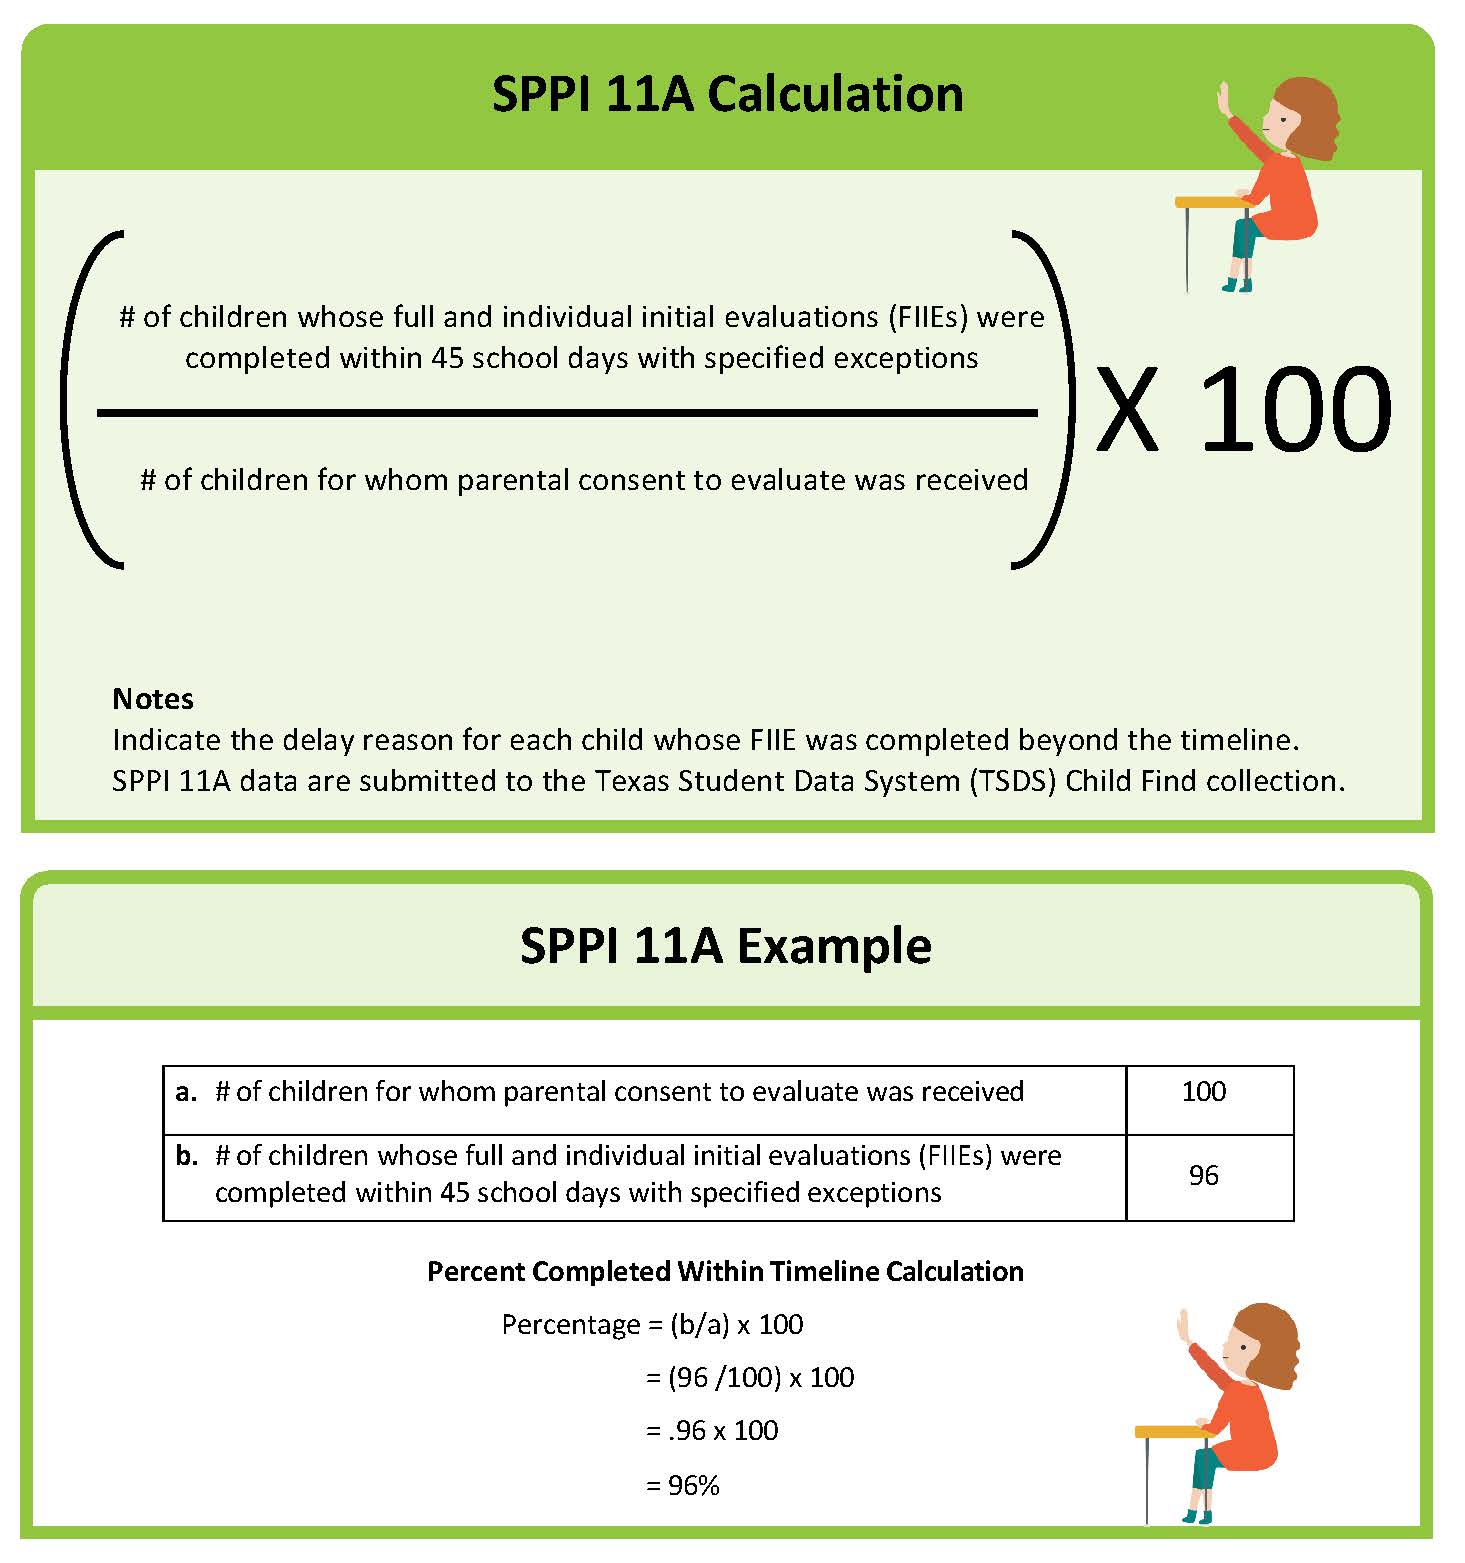 sppi-11a-calculation-and-example.jpg